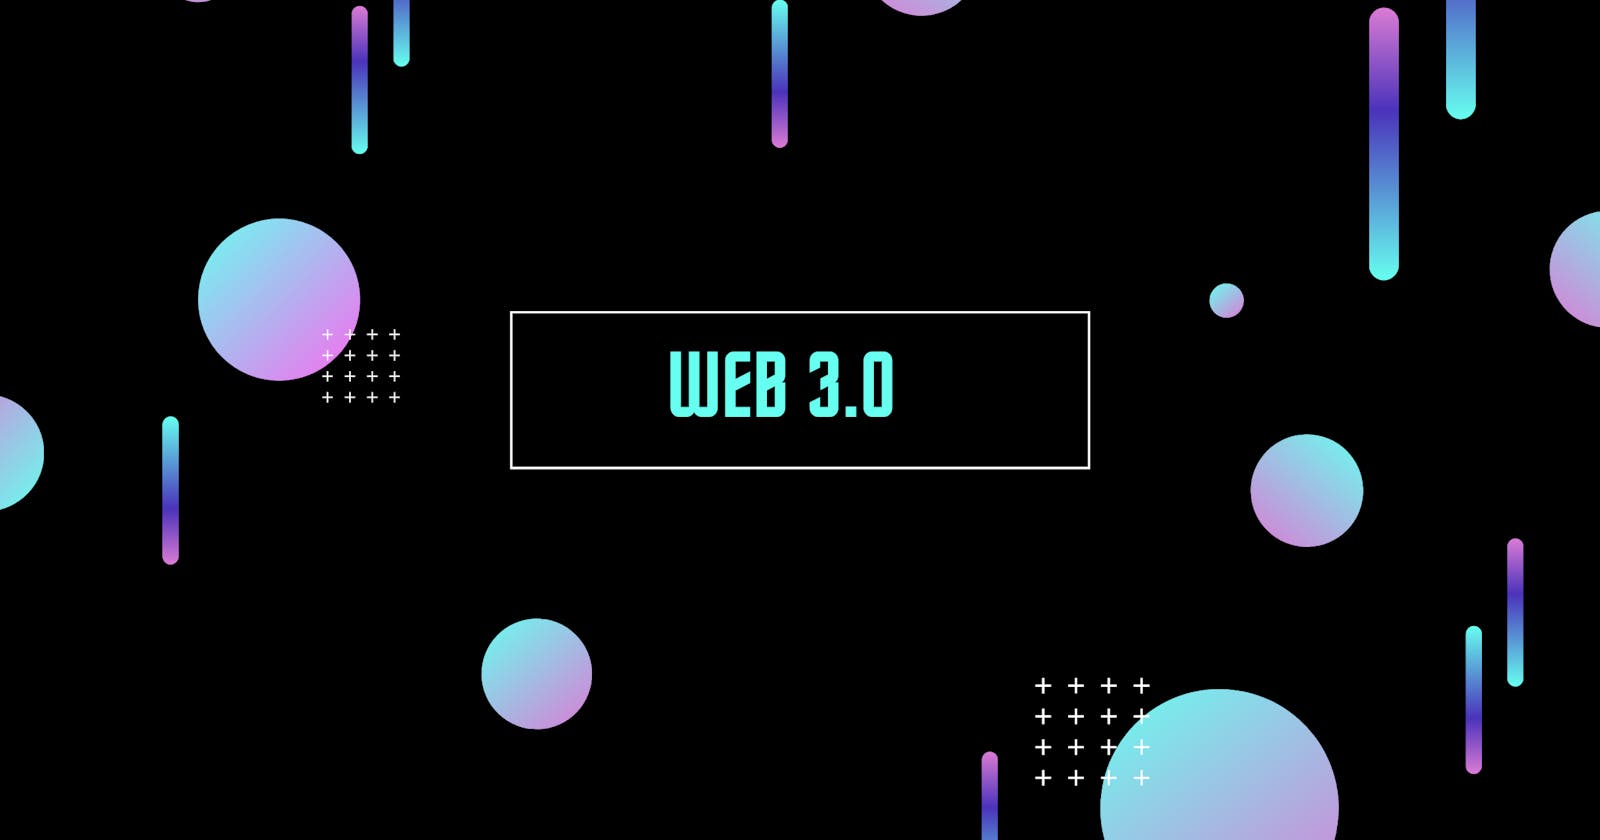 Is Web 3.0 the future?